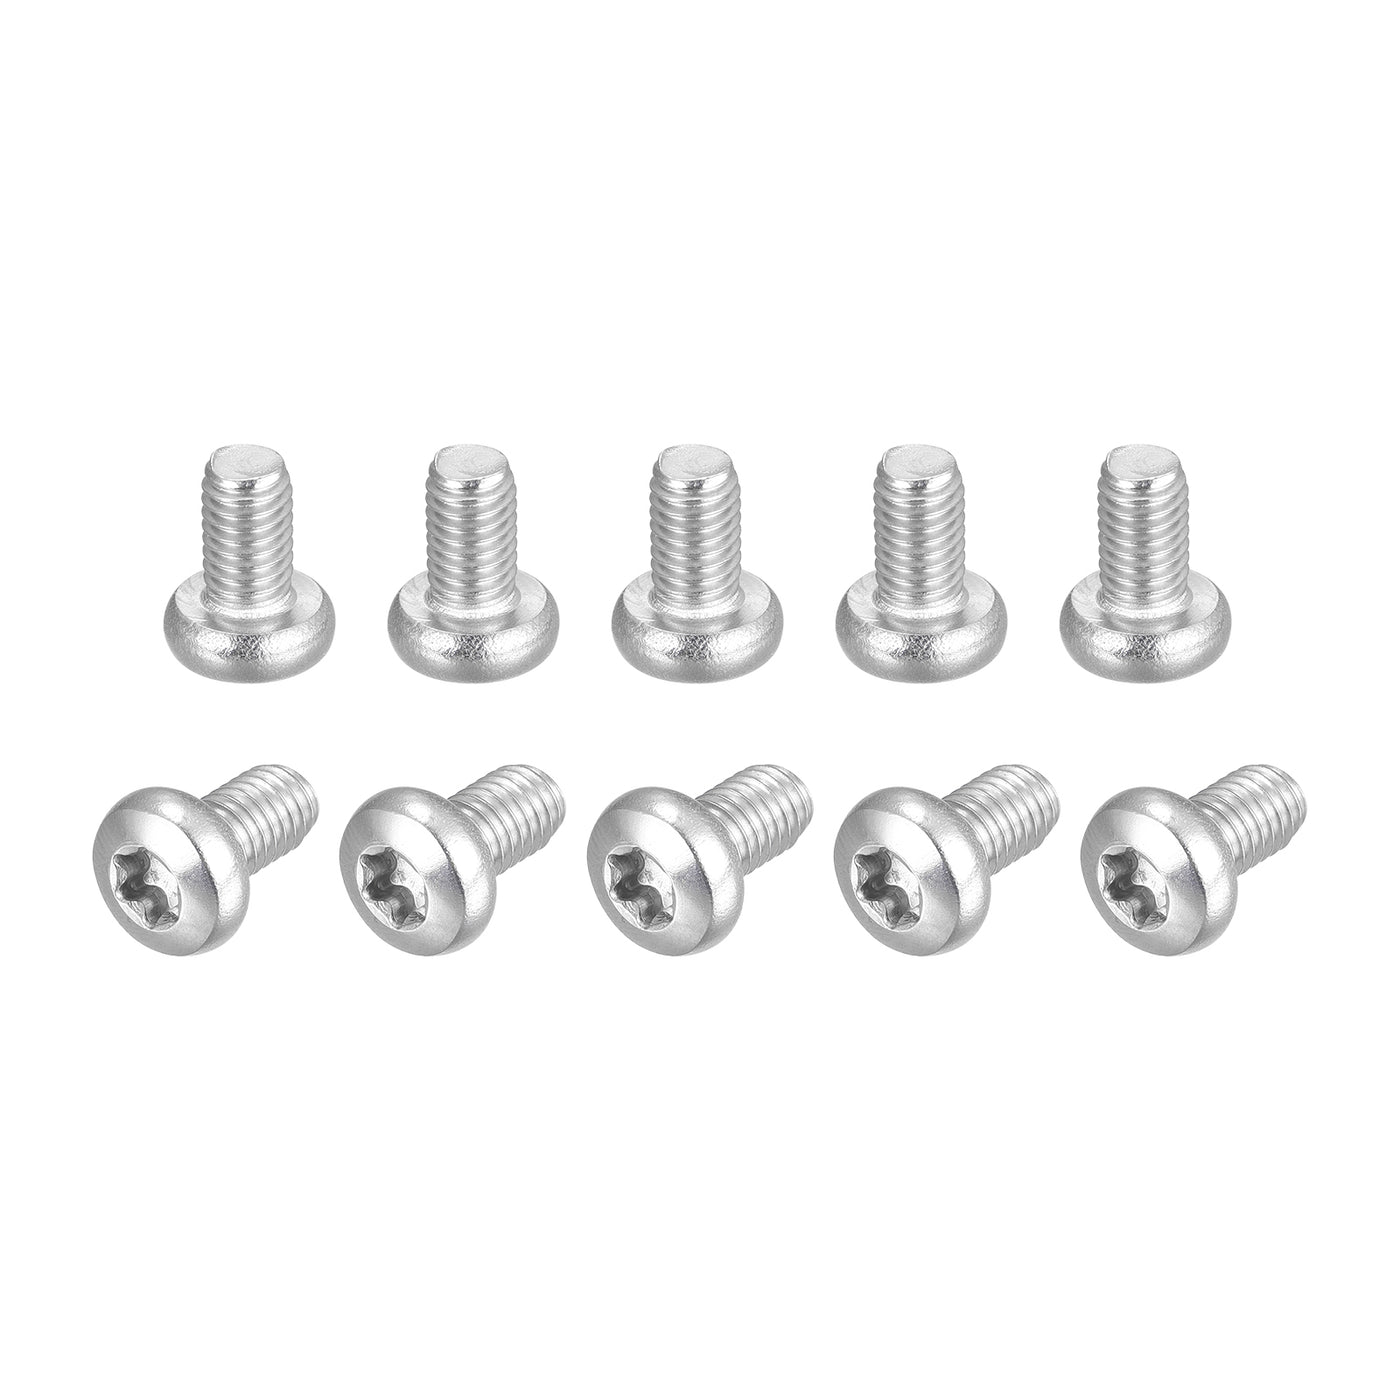 uxcell Uxcell M5x8mm Torx Security Machine Screws, 10pcs 316 Stainless Steel Pan Head Screw